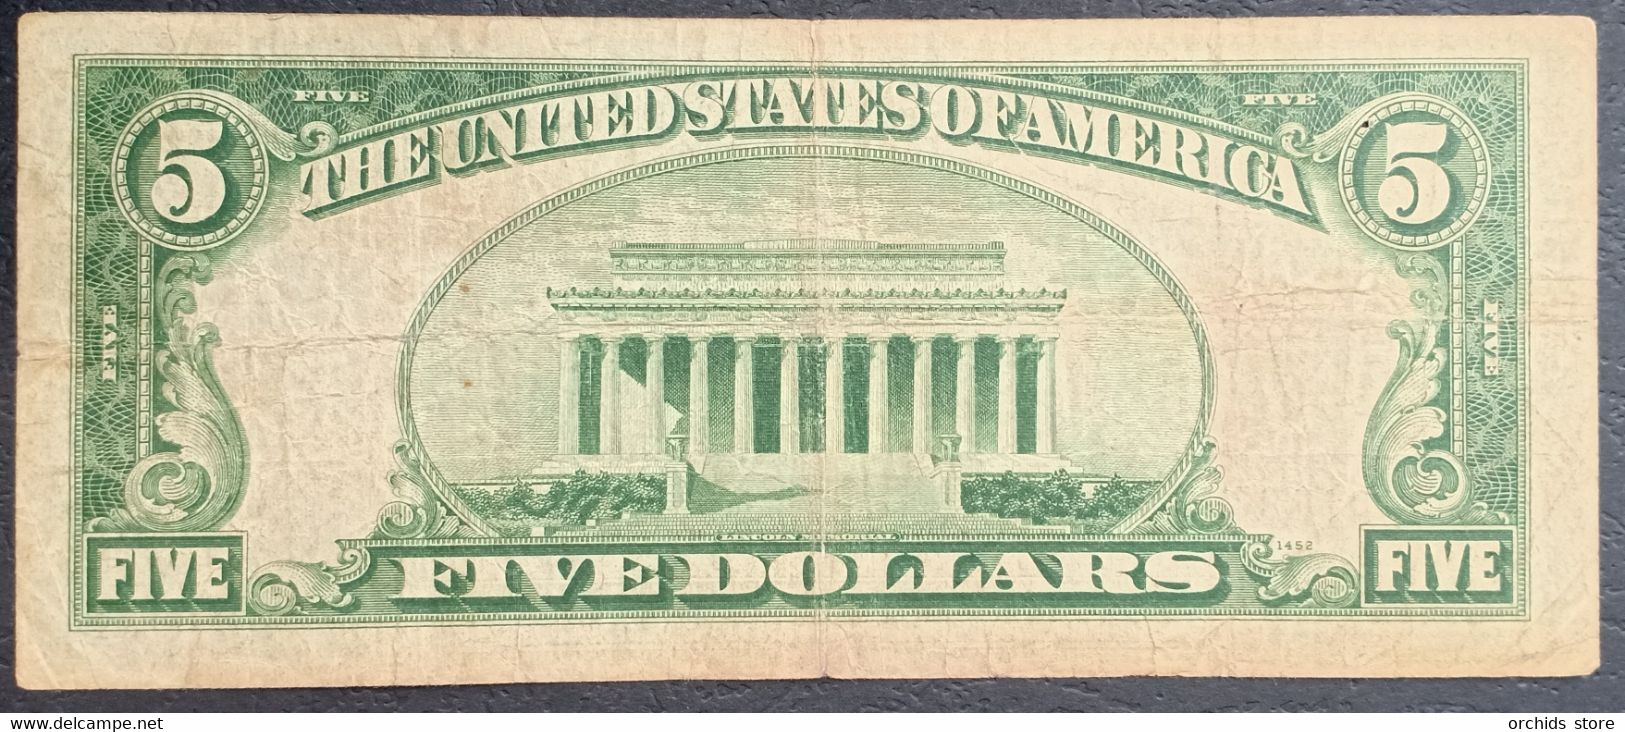 PB0211 - USA SERIES 1928 C Red Certificate Banknote 5 Dollars Serial #G10810997A - United States Notes (1928-1953)